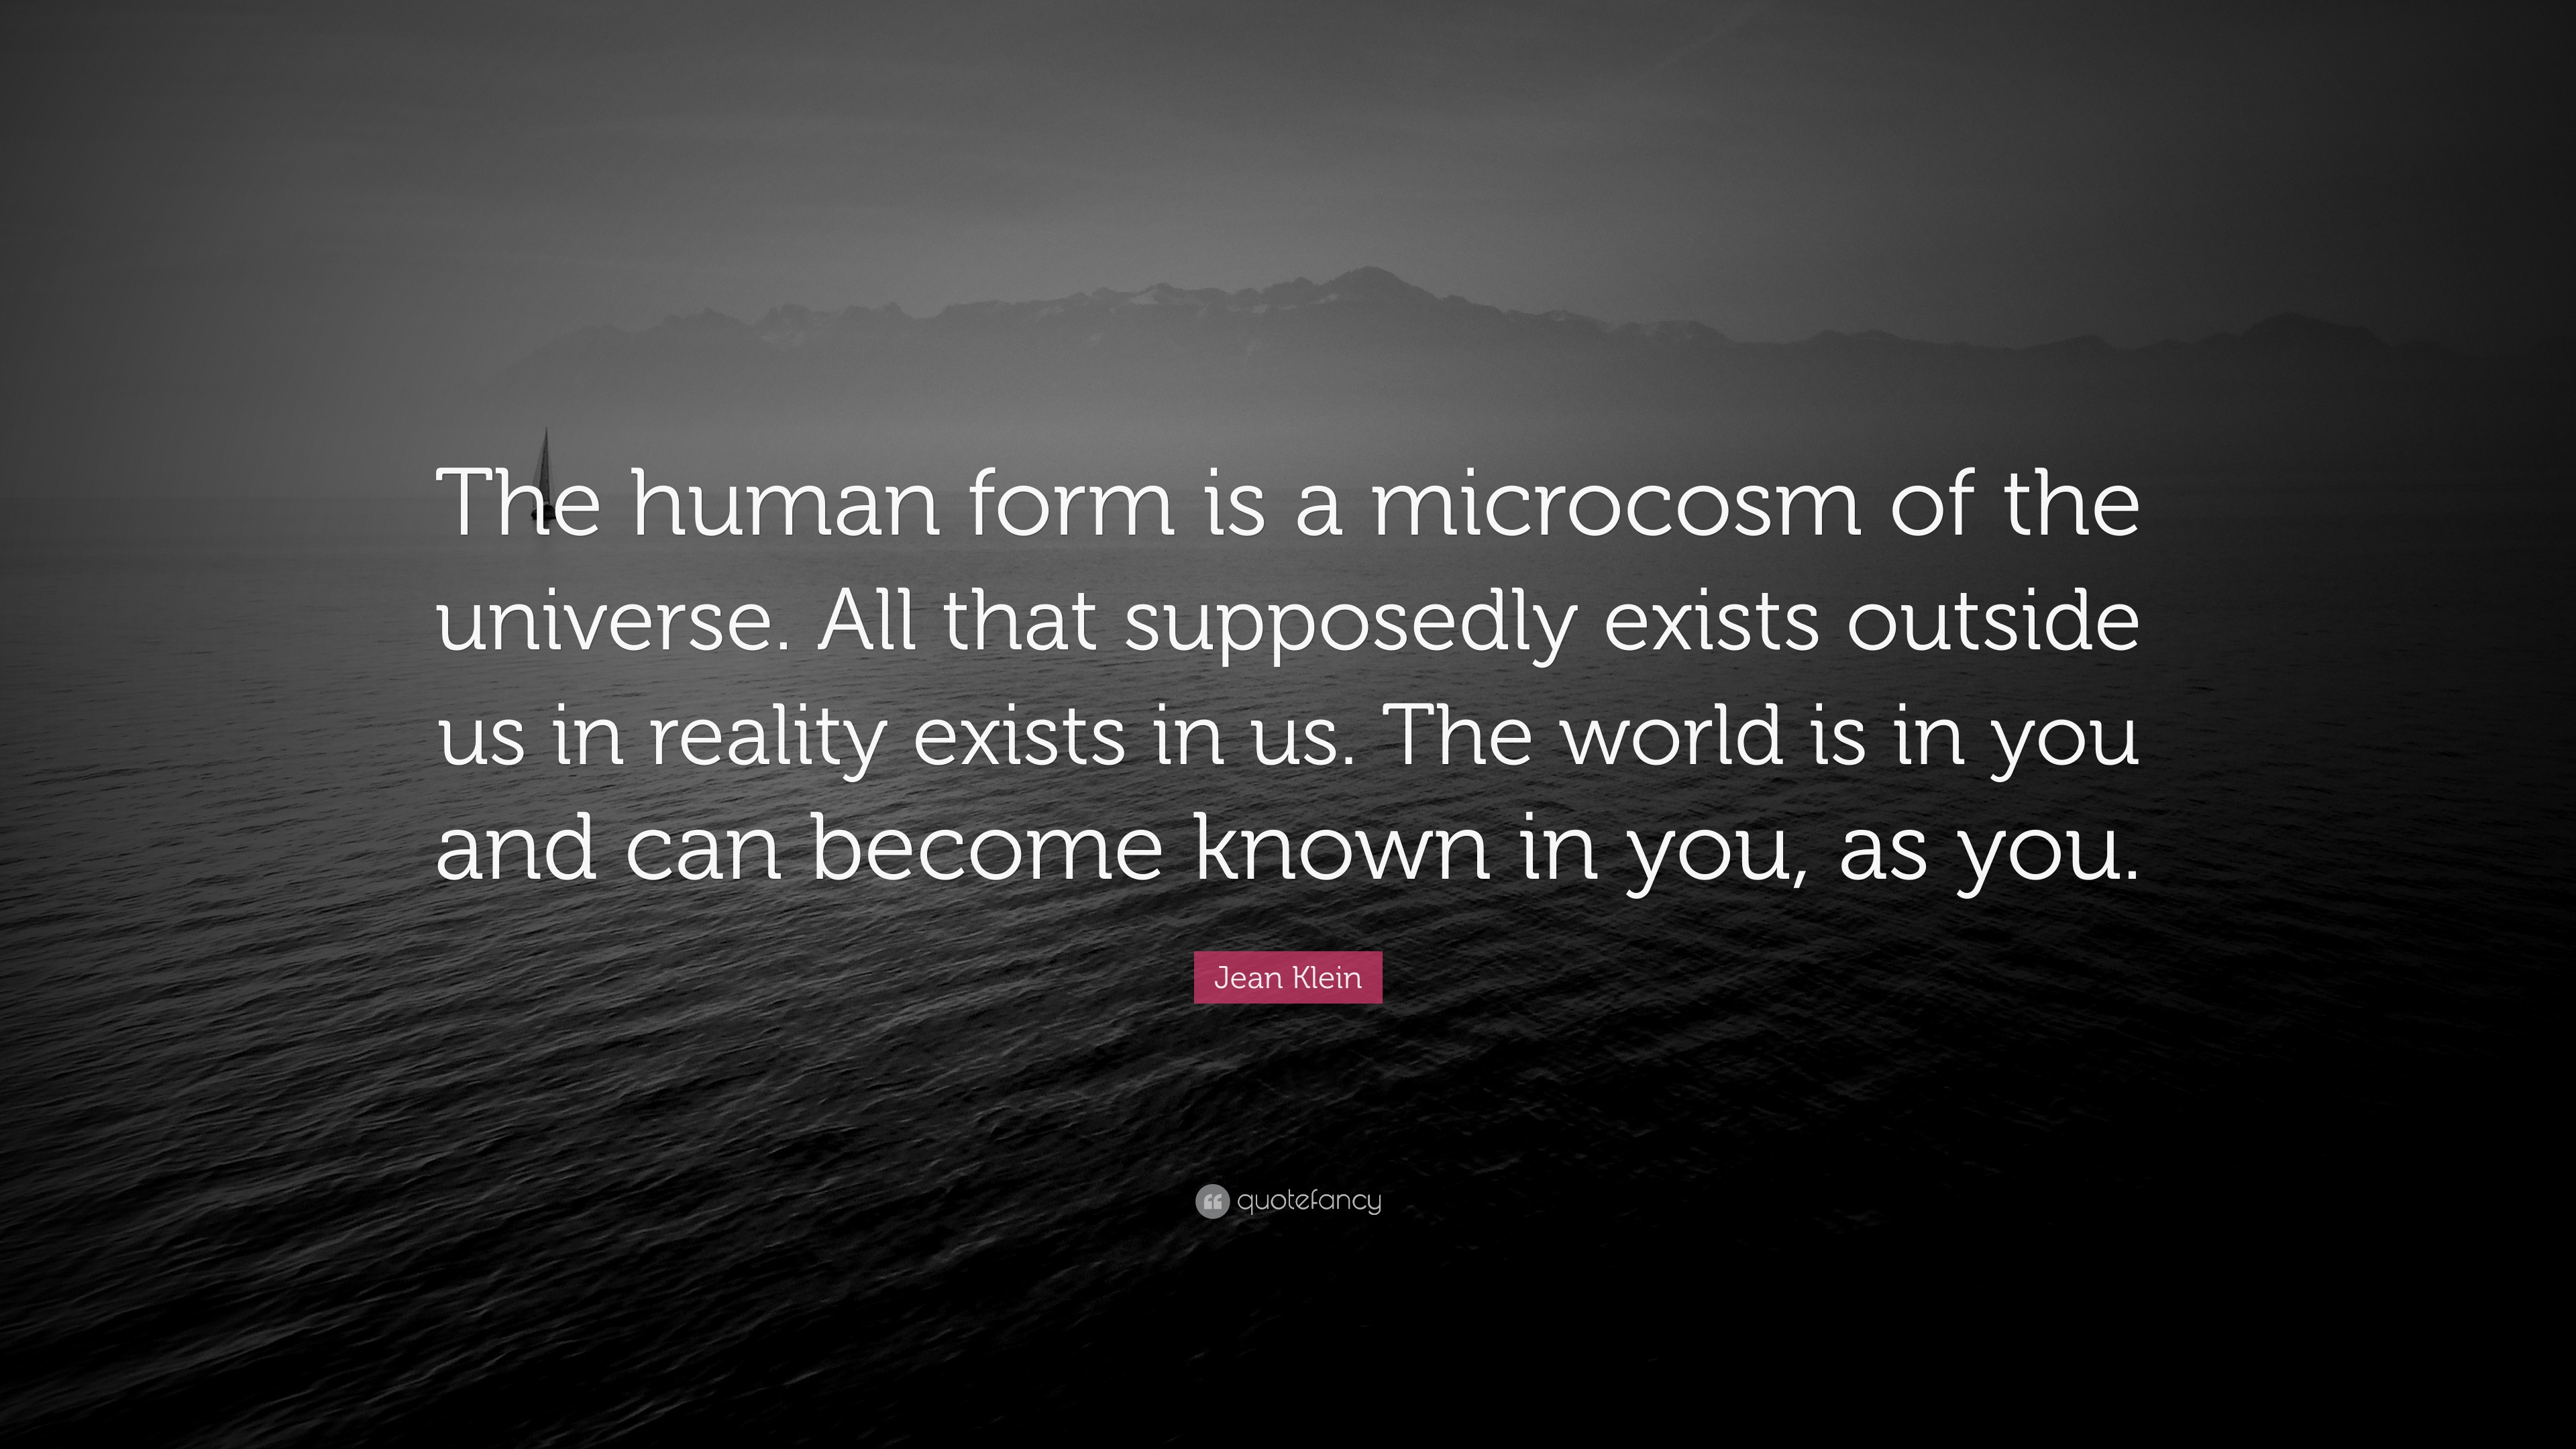 https://quotefancy.com/media/wallpaper/3840x2160/4983662-Jean-Klein-Quote-The-human-form-is-a-microcosm-of-the-universe-All.jpg